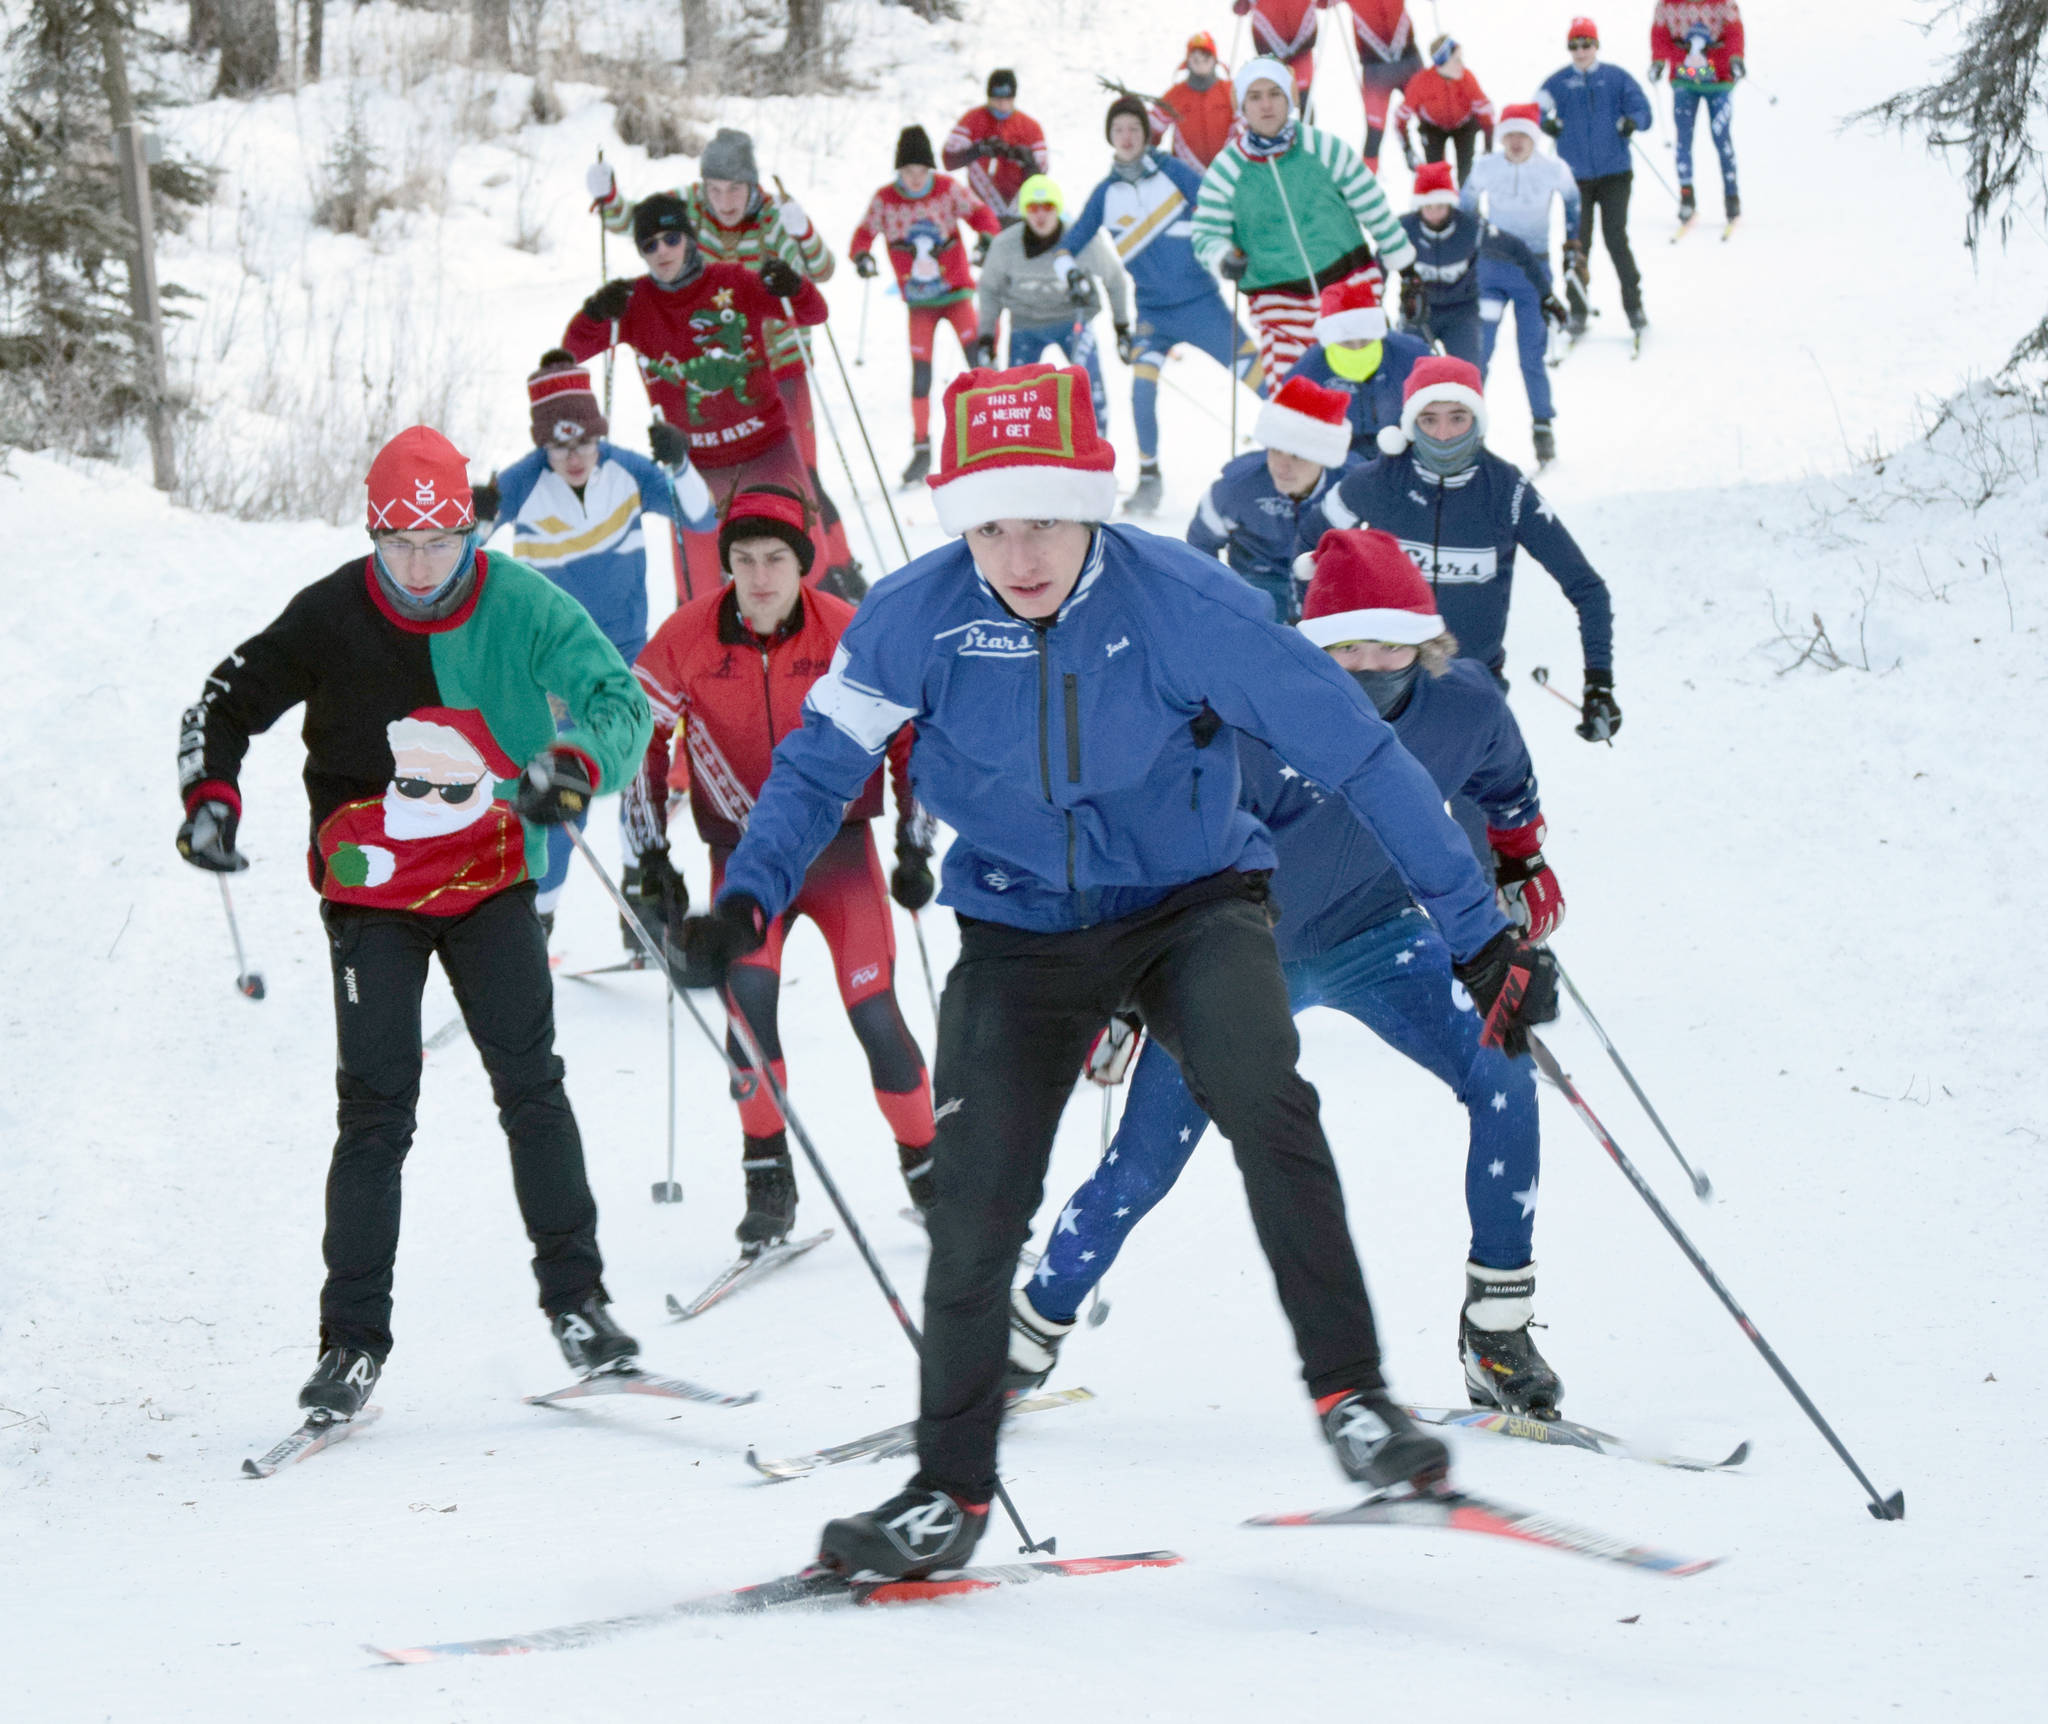 Soldotna’s Jack Harris leads racers up the first hill in the Candy Cane Scramble on Friday, Dec. 20, 2019, at Tsalteshi Trails near Soldotna, Alaska. (Photo by Jeff Helminiak/Peninsula Clarion)